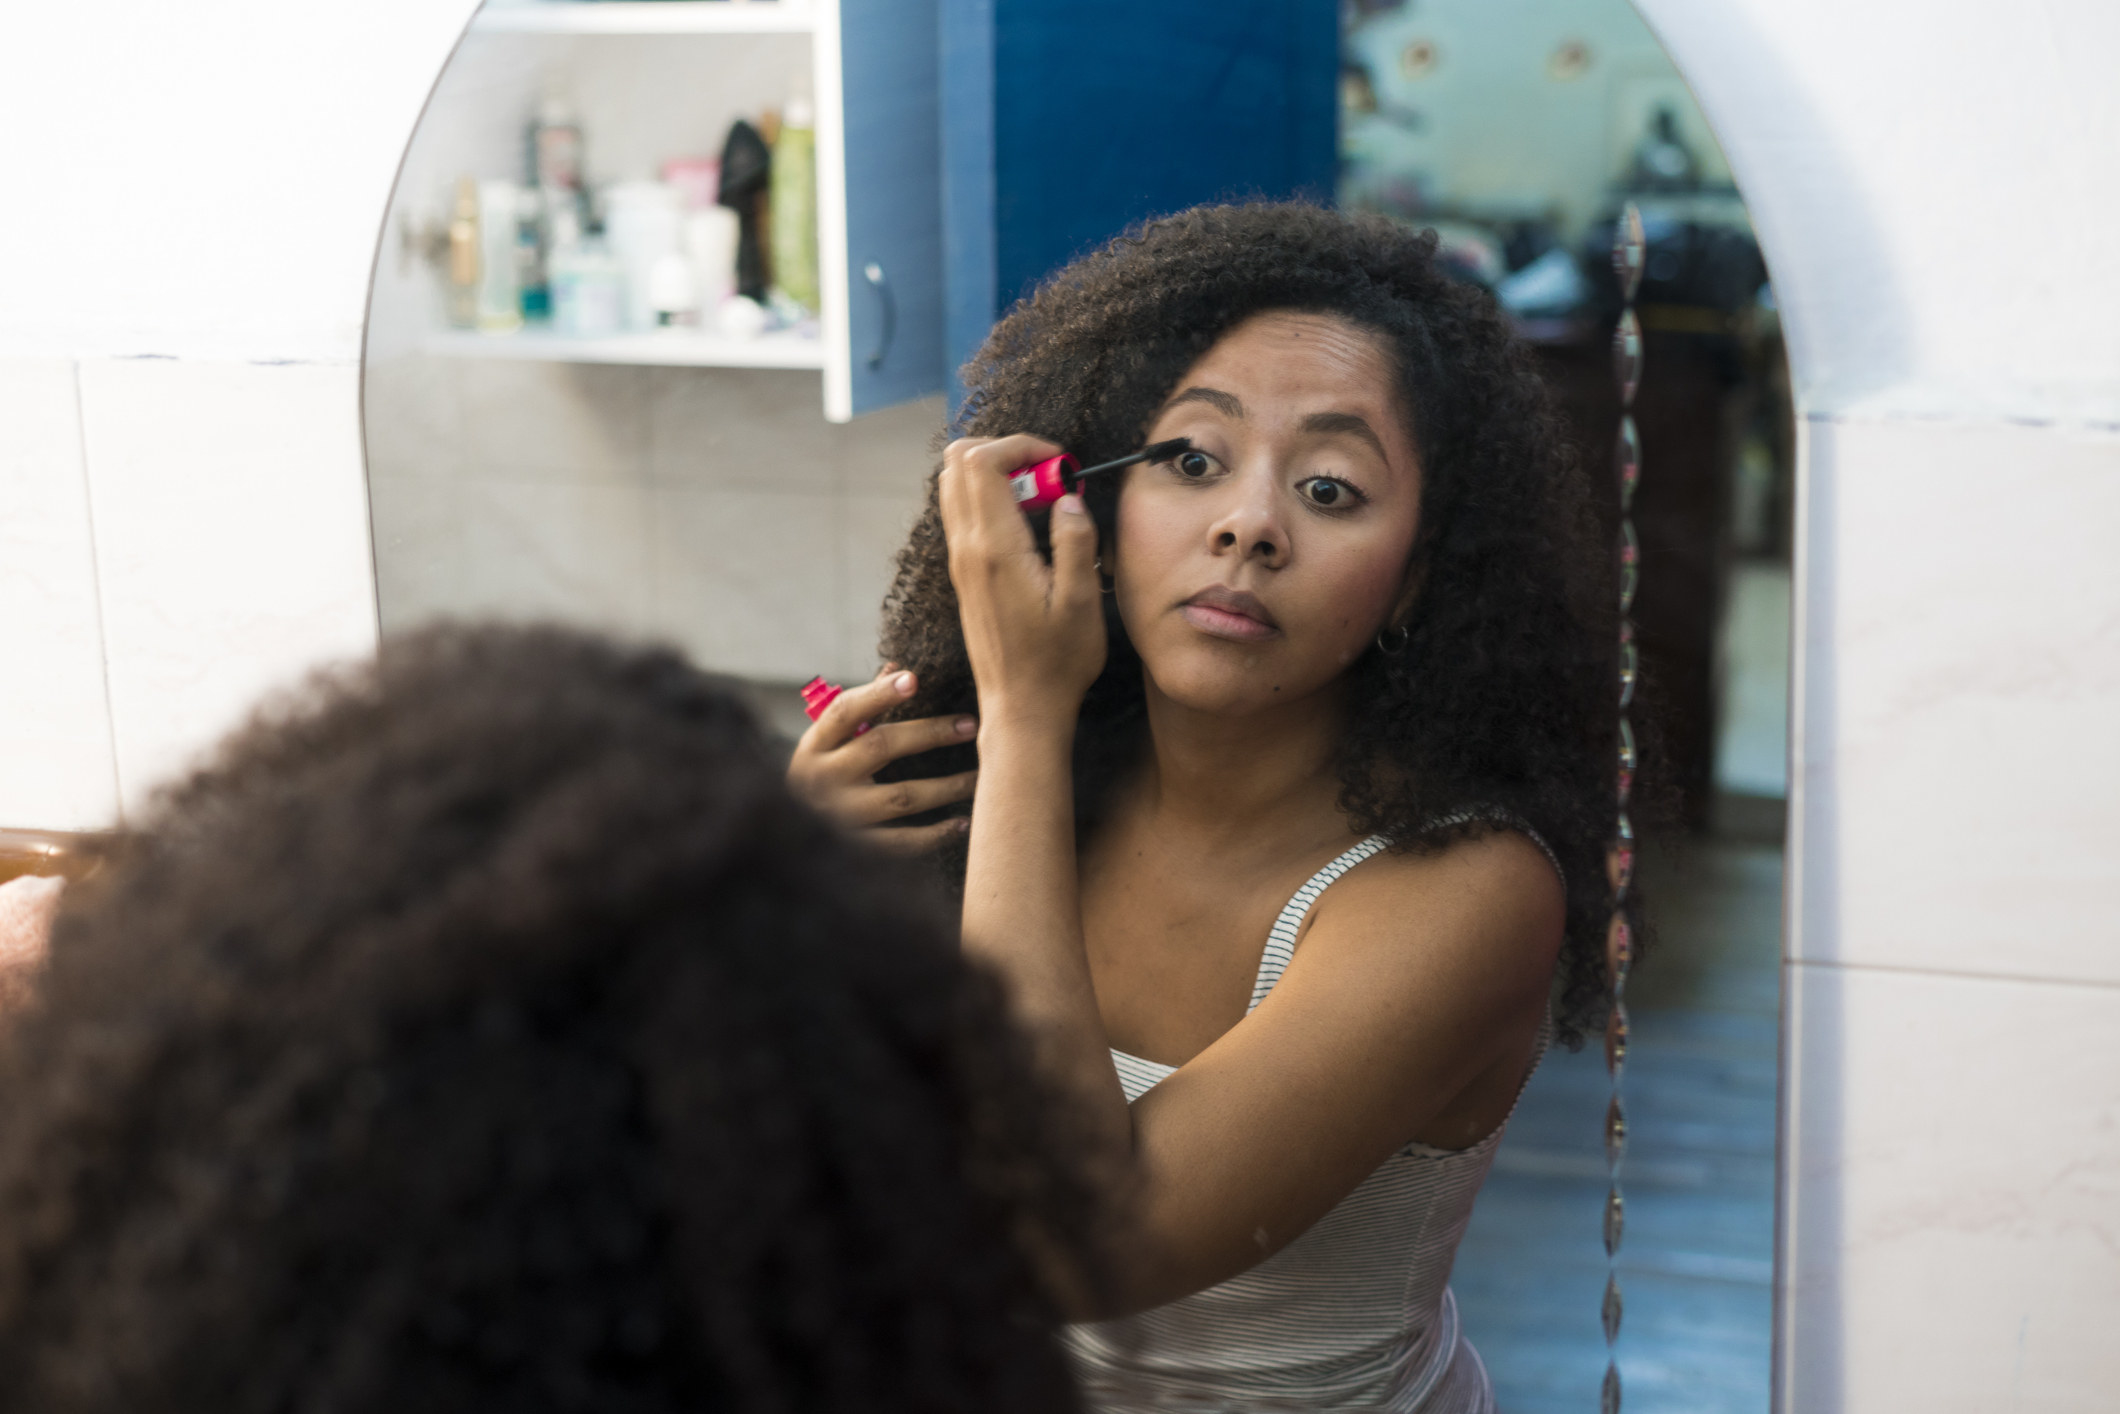 A young woman applying makeup in front of the mirror